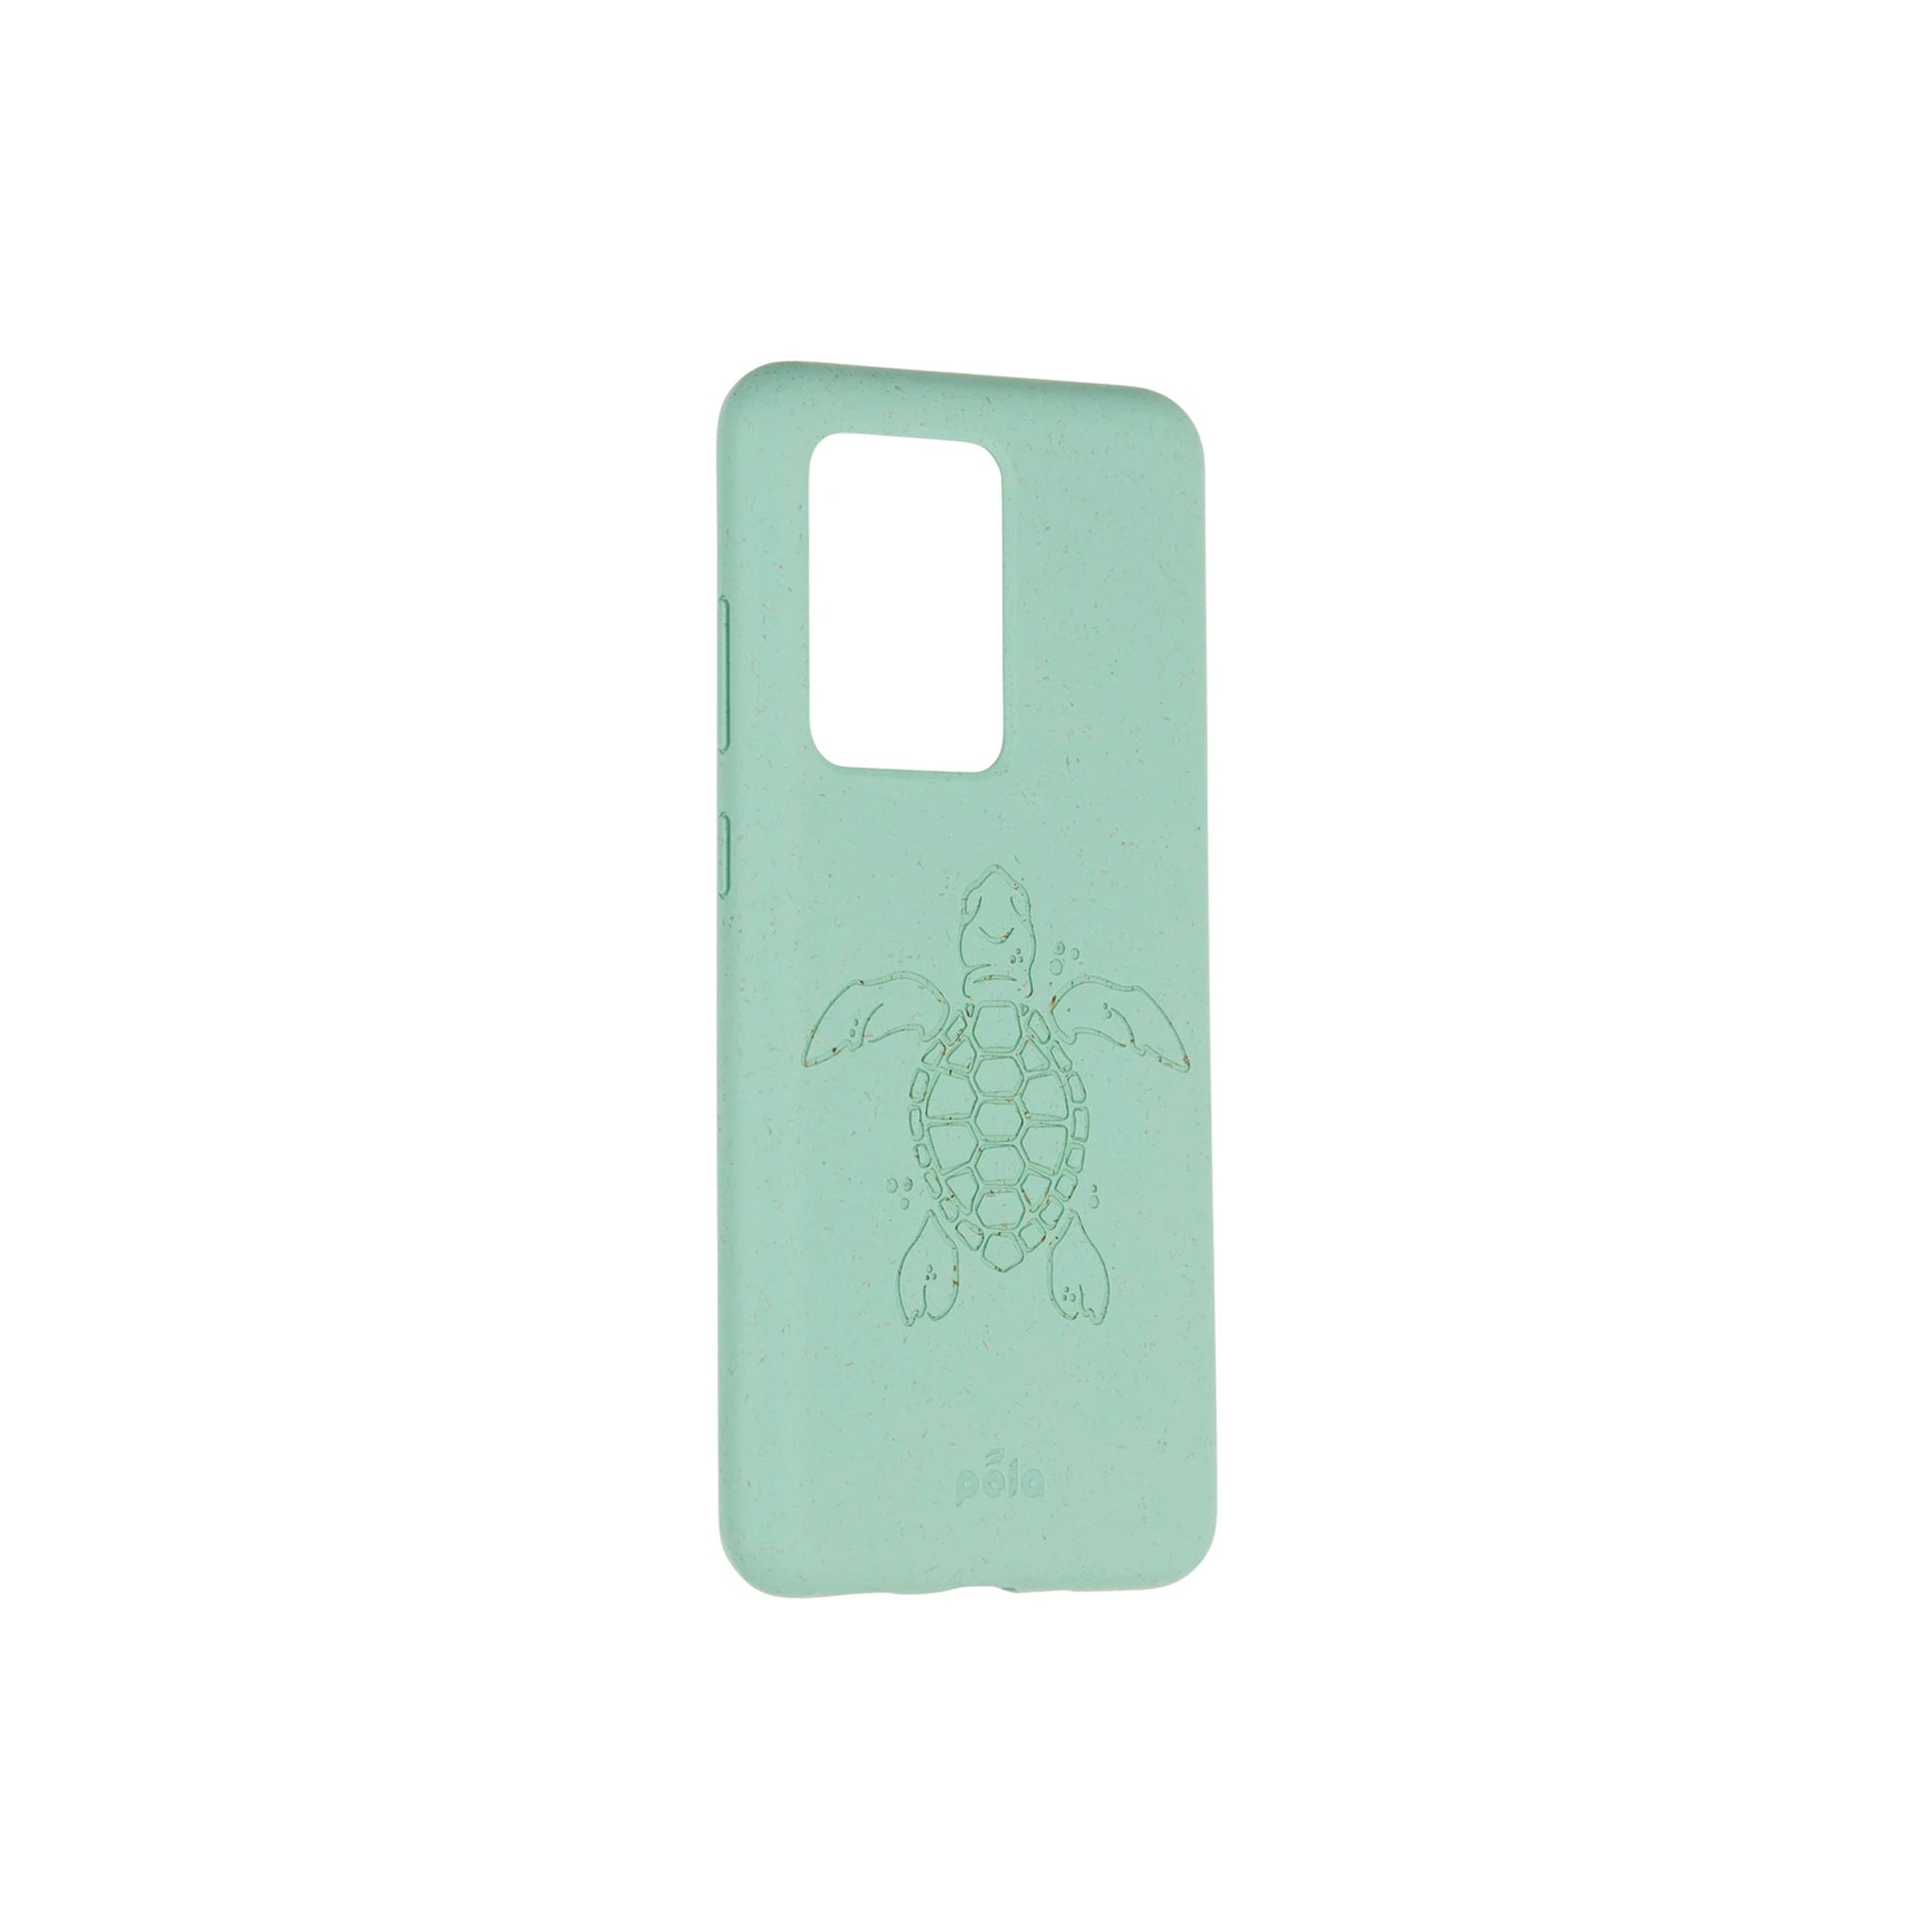 Pela - Eco Friendly Case For Samsung Galaxy S20 / S20 5g Uw - Ocean Turquoise Turtle Edition